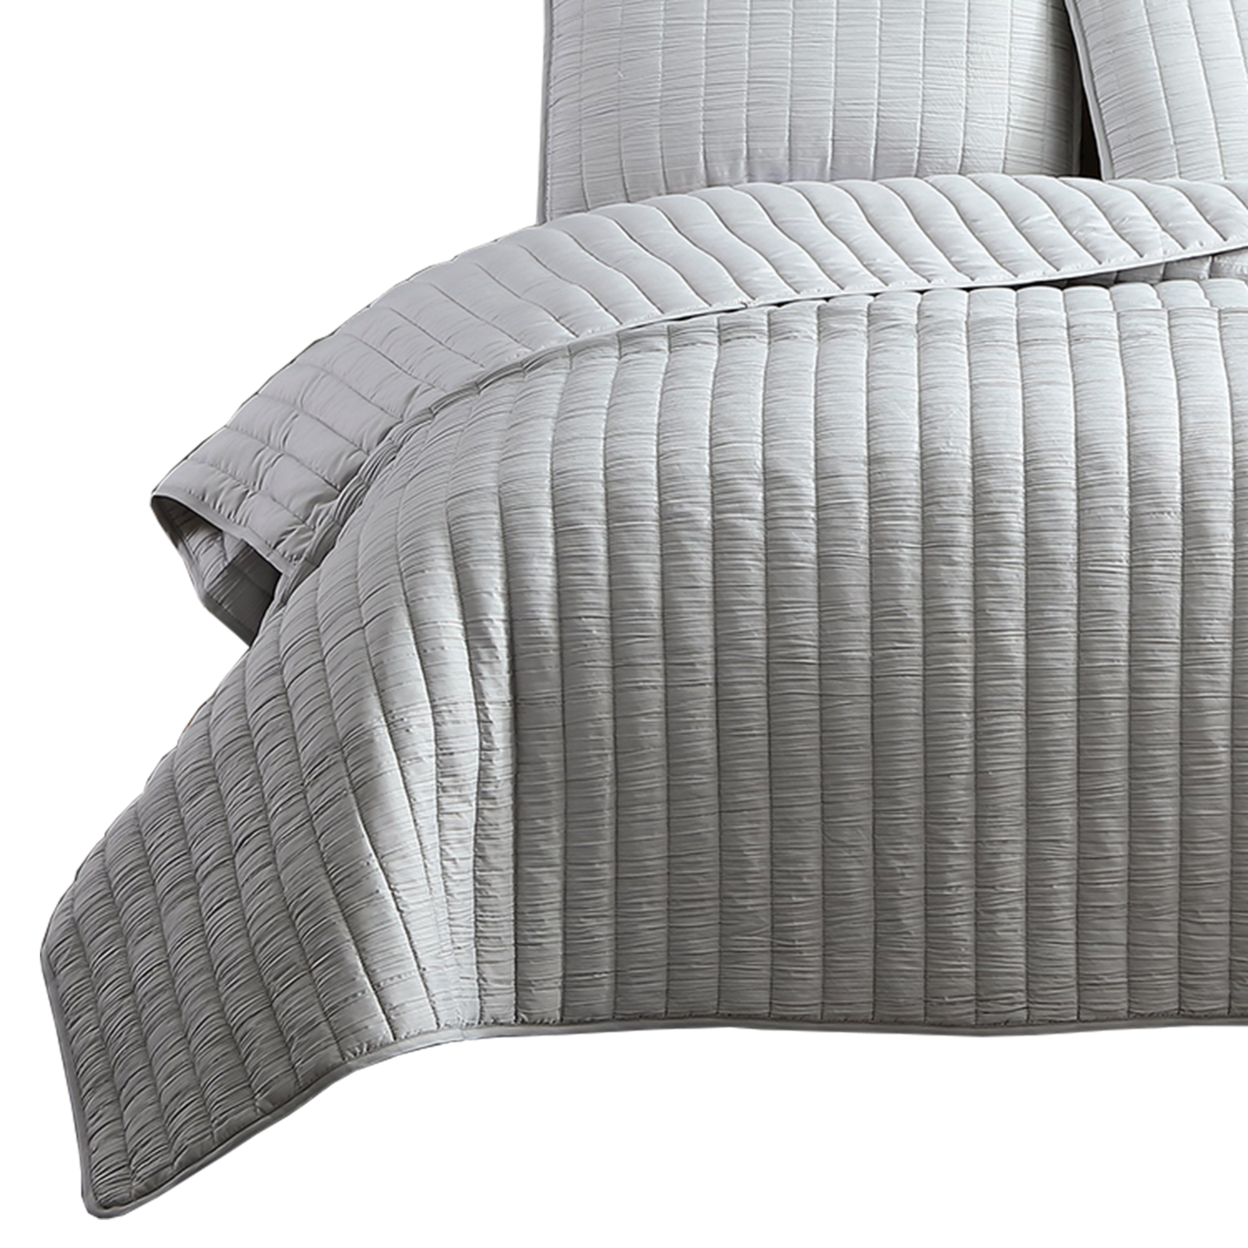 3 Piece Crinkle King Size Coverlet Set With Vertical Stitching, Light Gray- Saltoro Sherpi